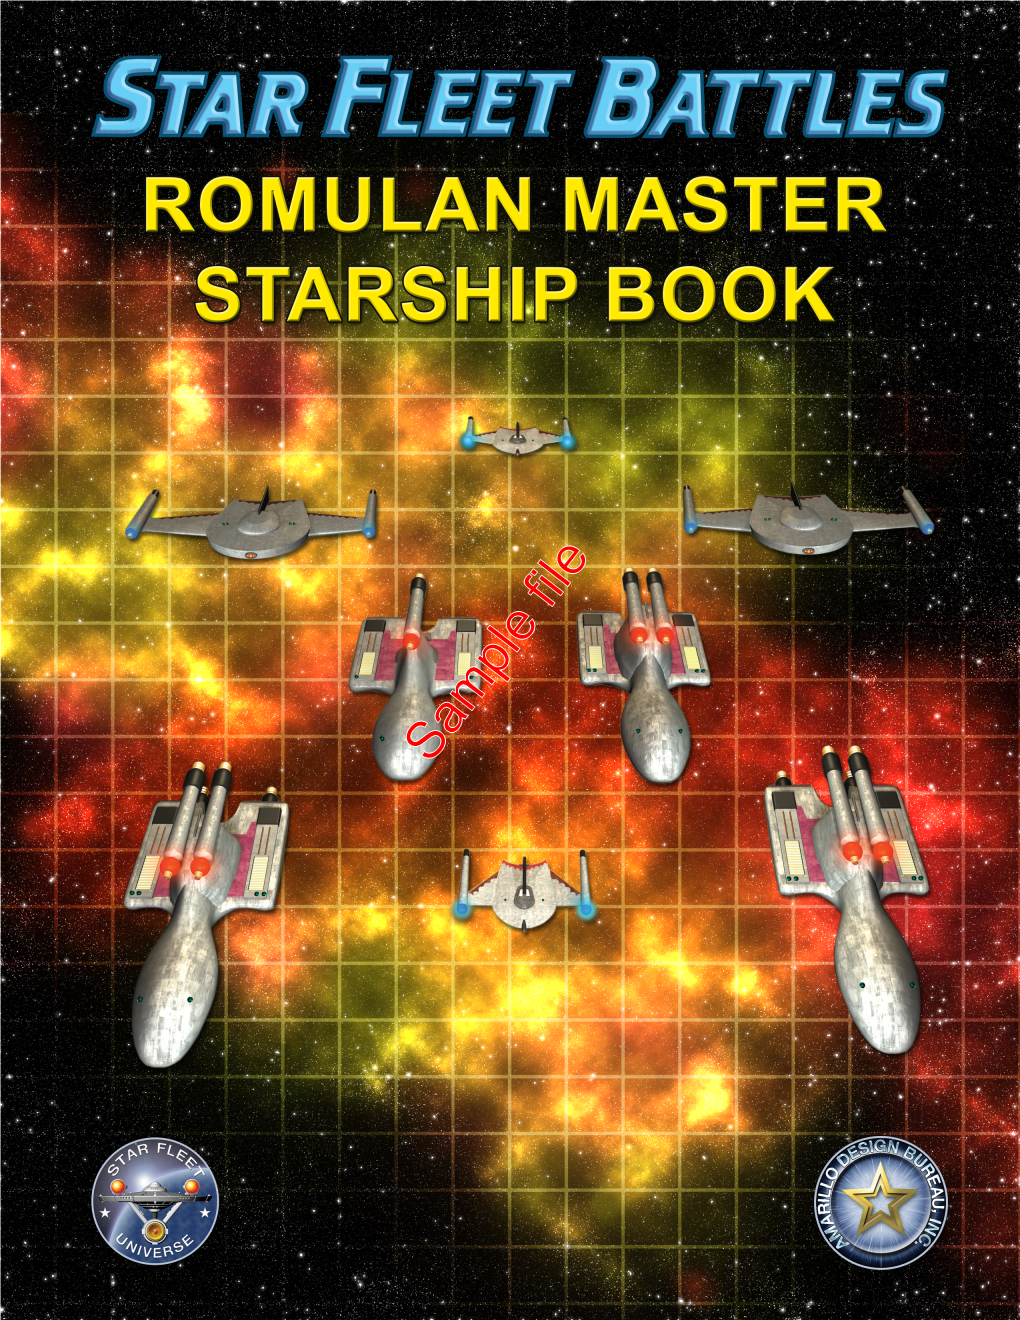 Romulan ✮ Master Starship Book Table of Contents